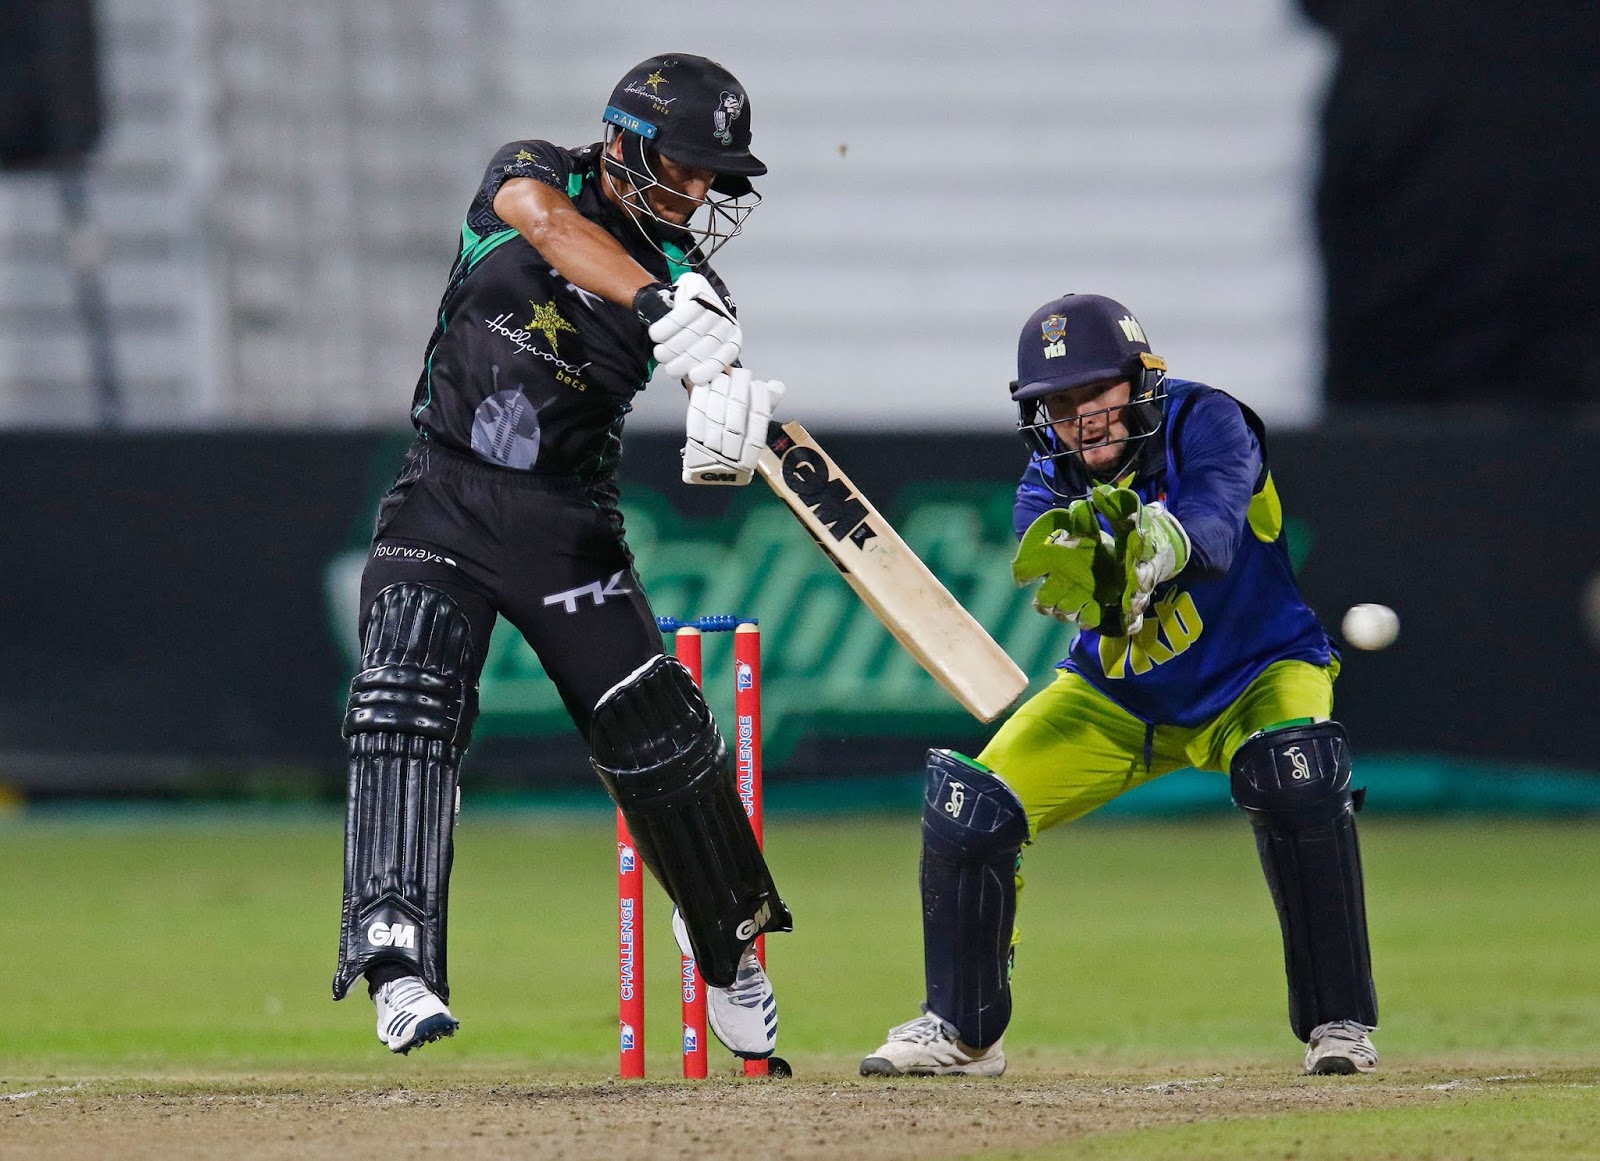 Marques Ackerman playing it off the backfoot in the CSA T20 Challenge for the Hollywoodbets Dolphins vs VKB Knights at Kingsmead.